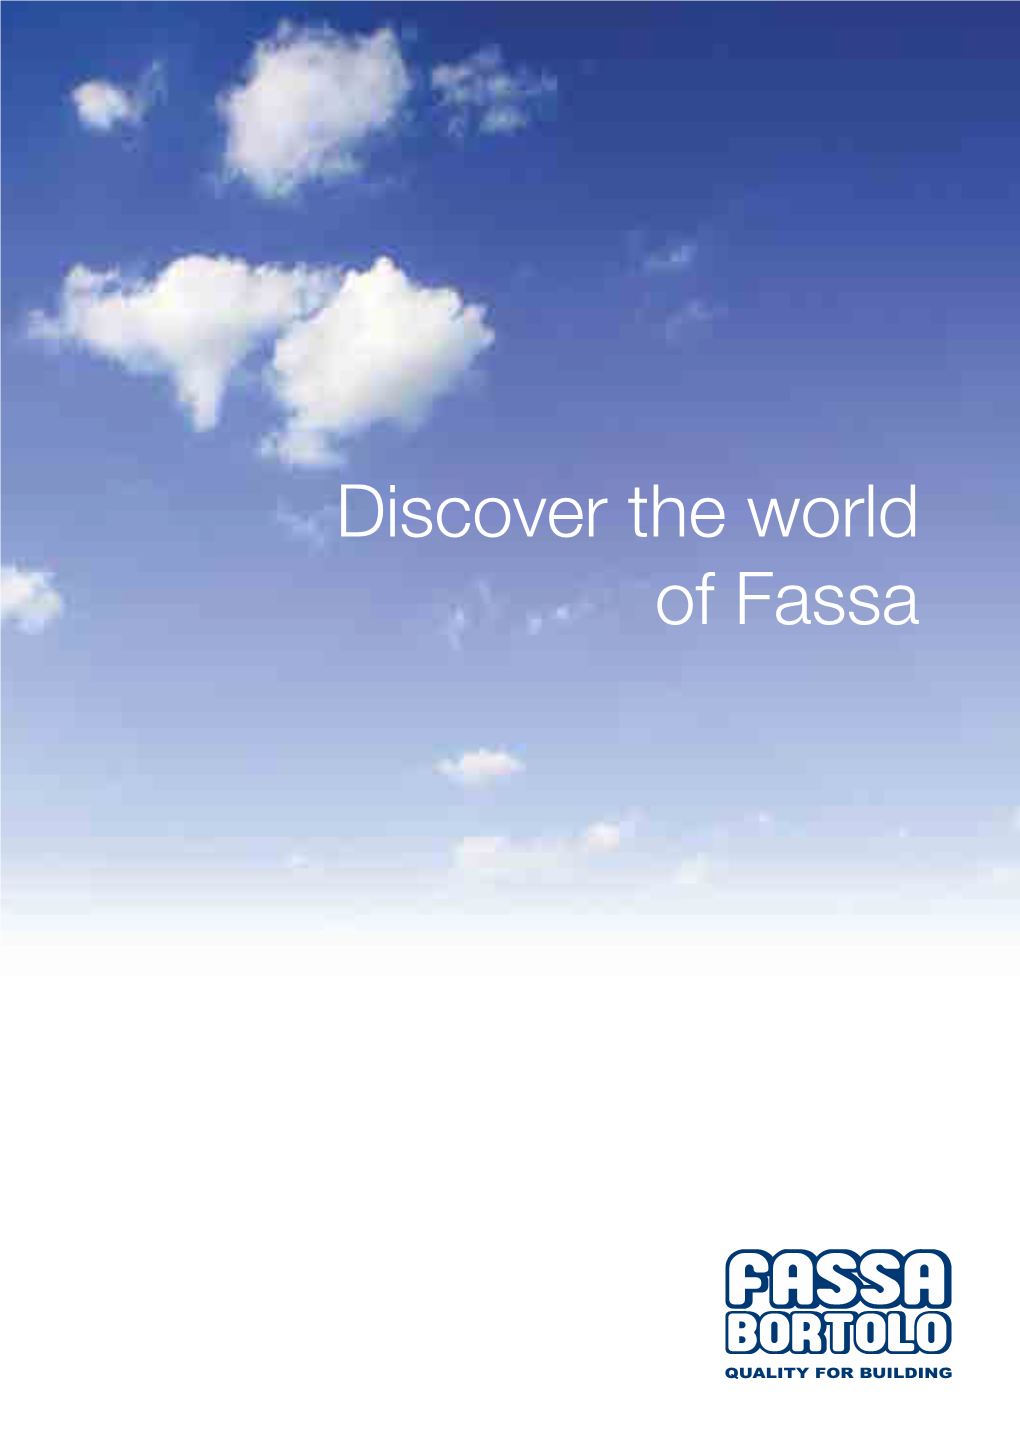 Discover the World of Fassa 2 Piles of Limestone and Lime Kiln Our History Is Made up of Values